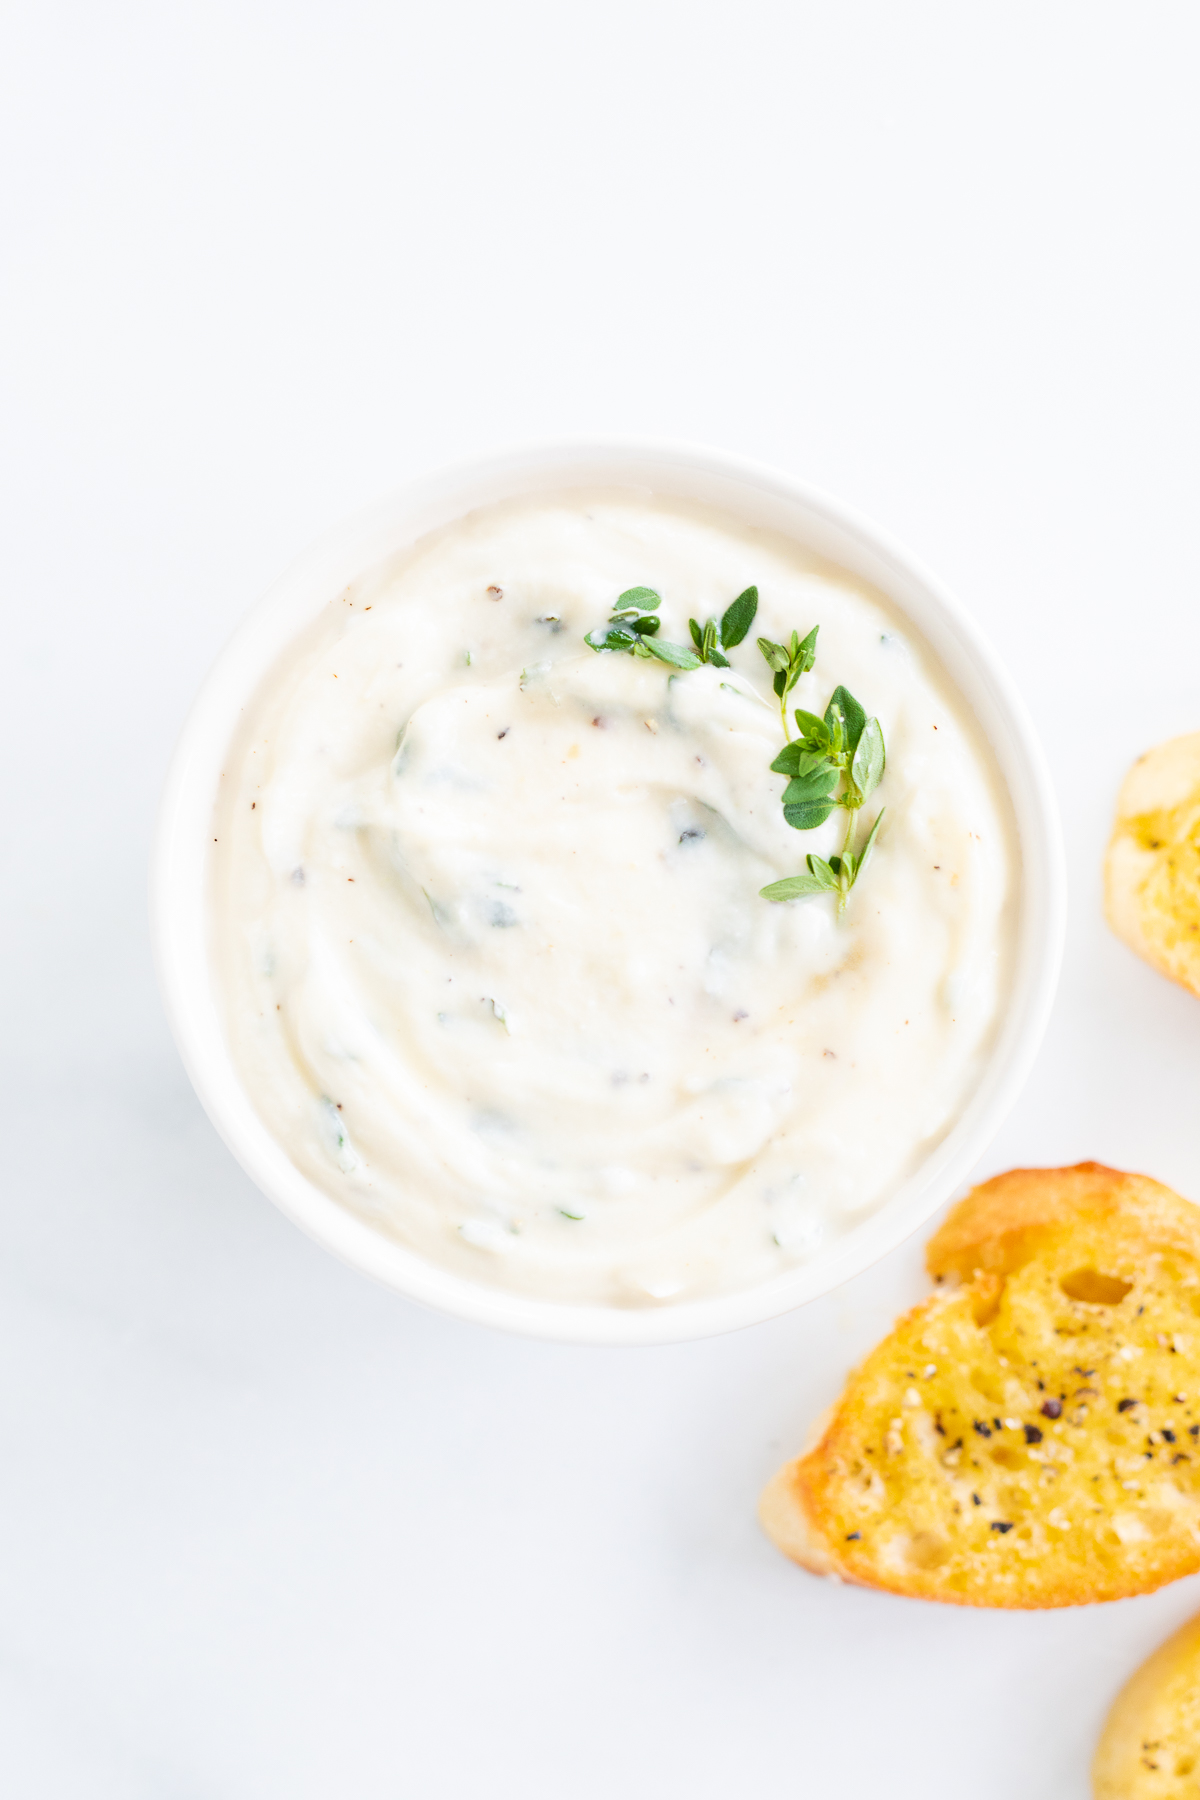 A bowl of whipped ricotta dip with bread and herbs on a white background.